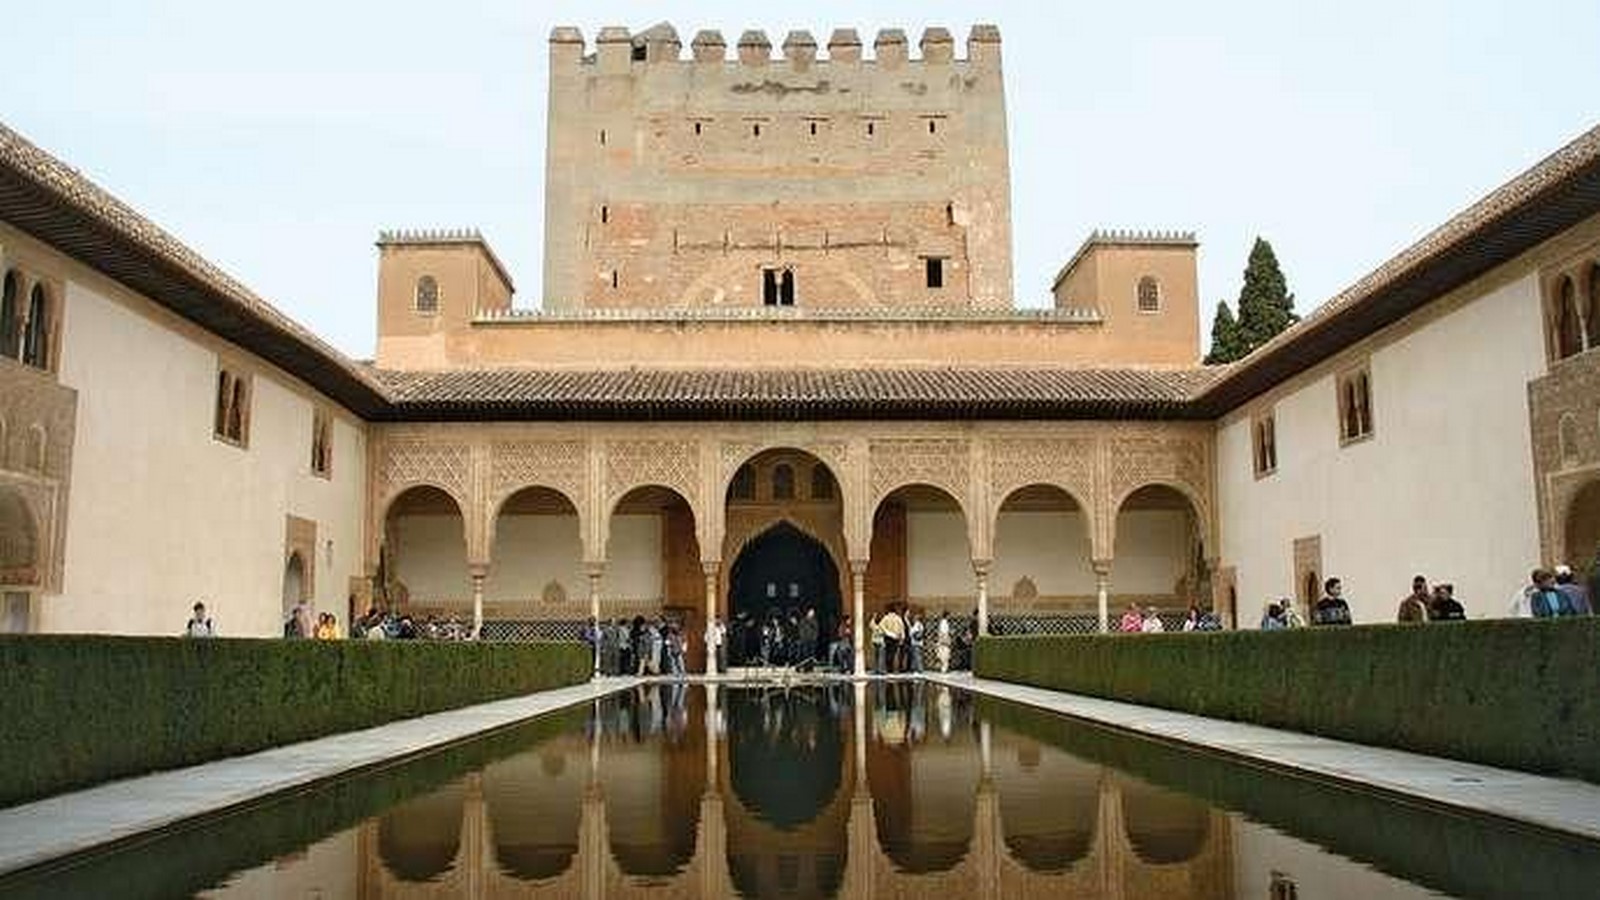 Alhambra, Spain: Islamic architecture of Spain - Sheet2